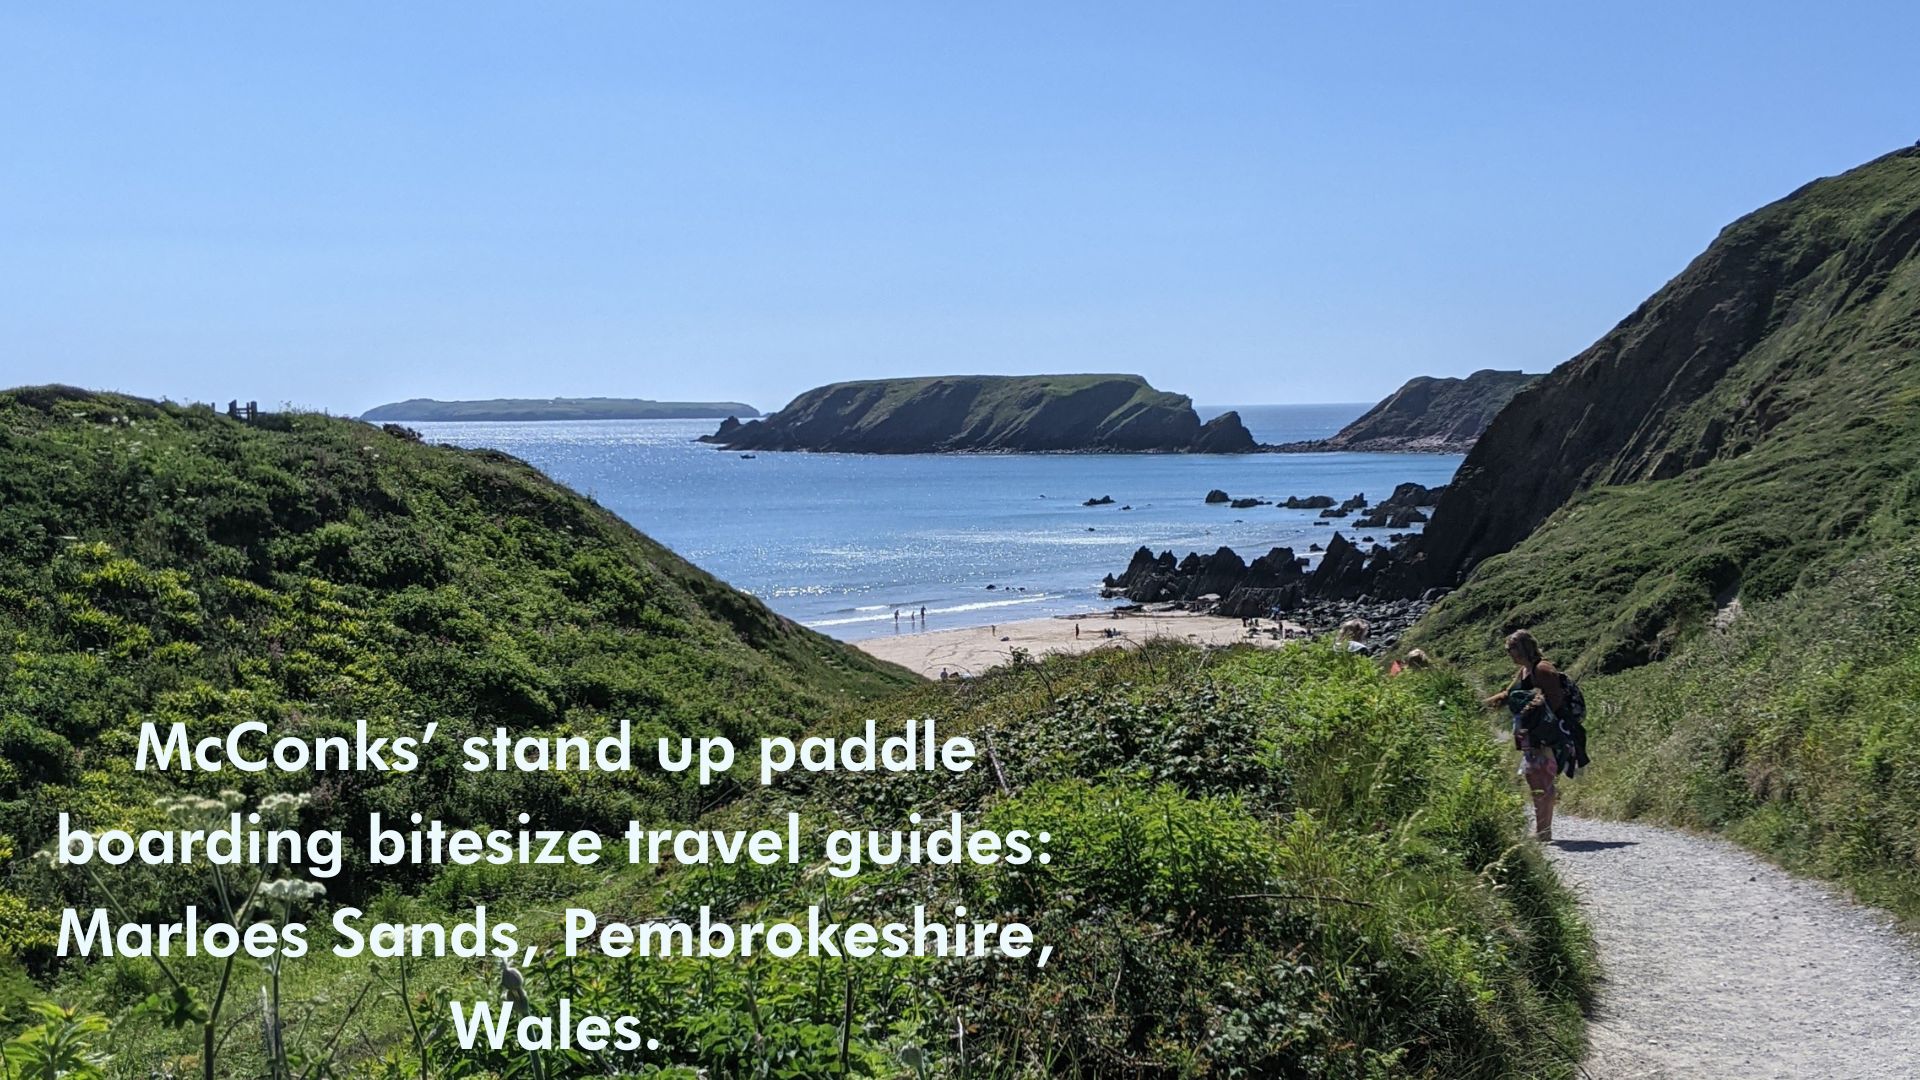 You are currently viewing McConks’ stand up paddle boarding bitesize travel guides: Marloes Sands, Pembrokeshire, Wales.